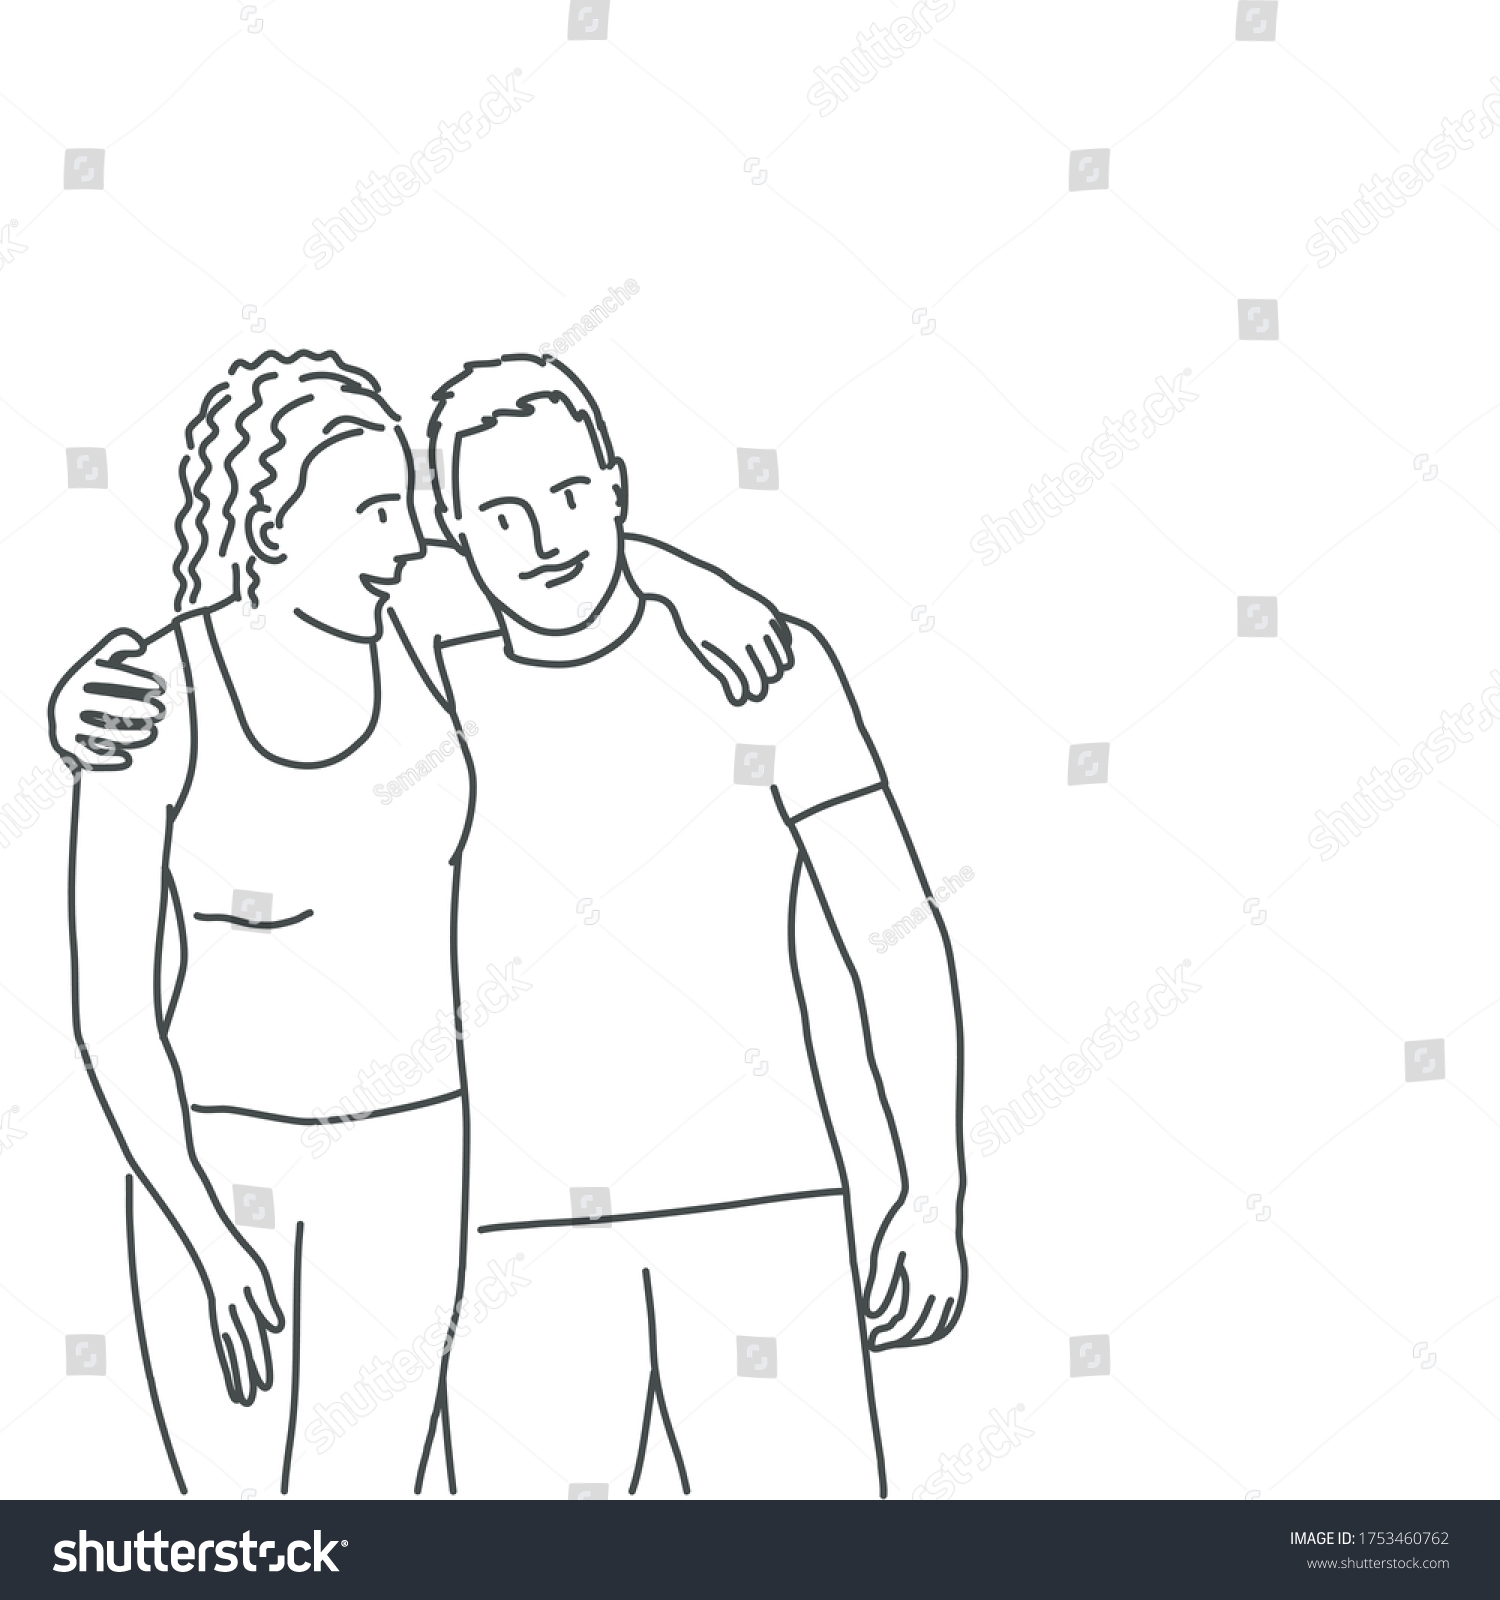 Couple Embracing Line Drawing Vector Illustration Stock Vector (Royalty